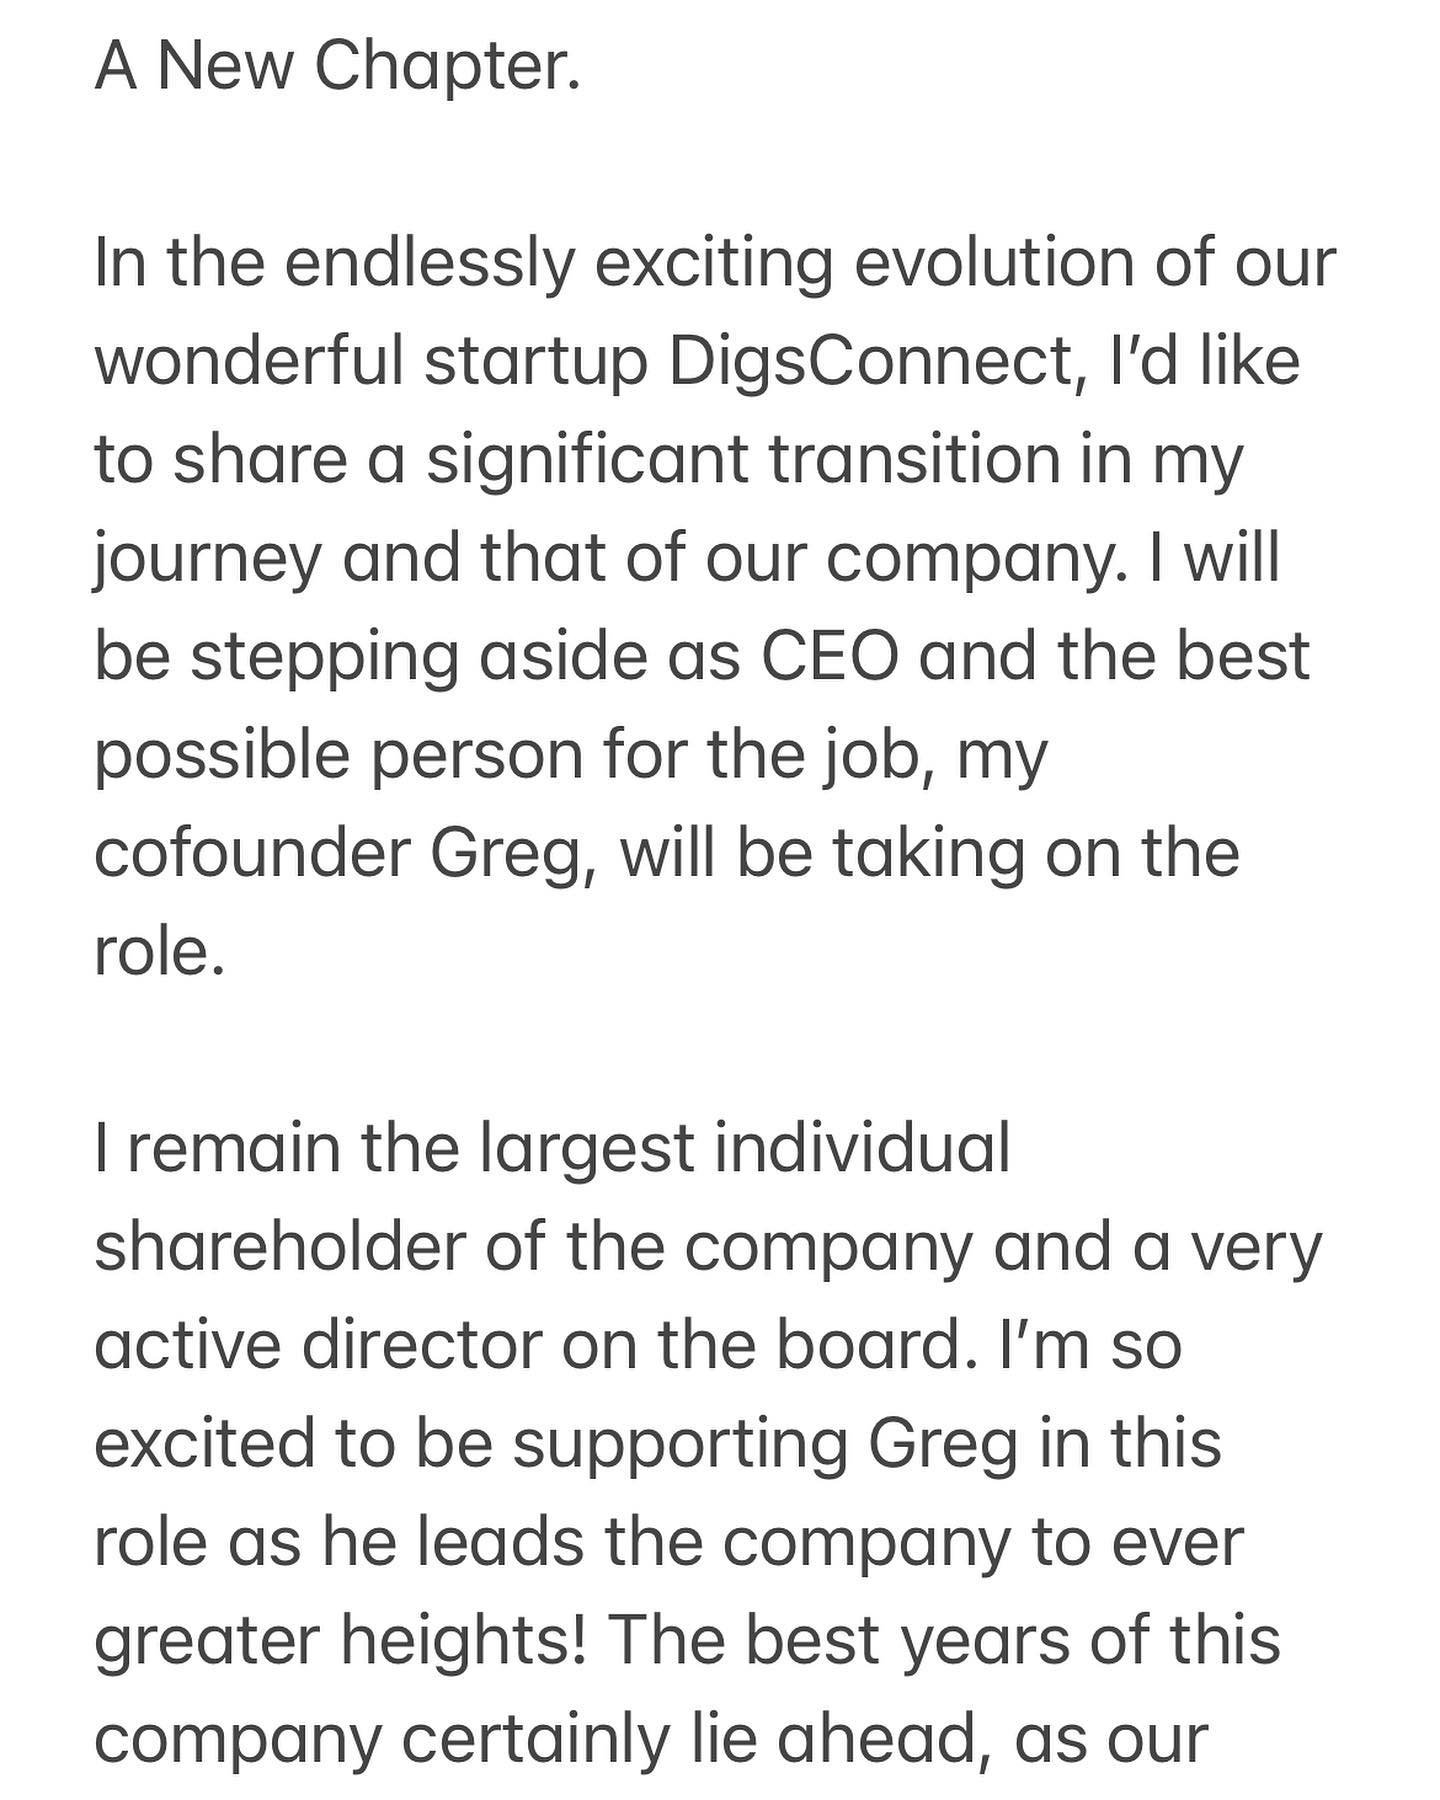 A New Chapter.

In the endlessly exciting evolution of our wonderful startup DigsConnect, I&rsquo;d like to share a significant transition in my journey and that of our company. I will be stepping aside as CEO and the best possible person for the job